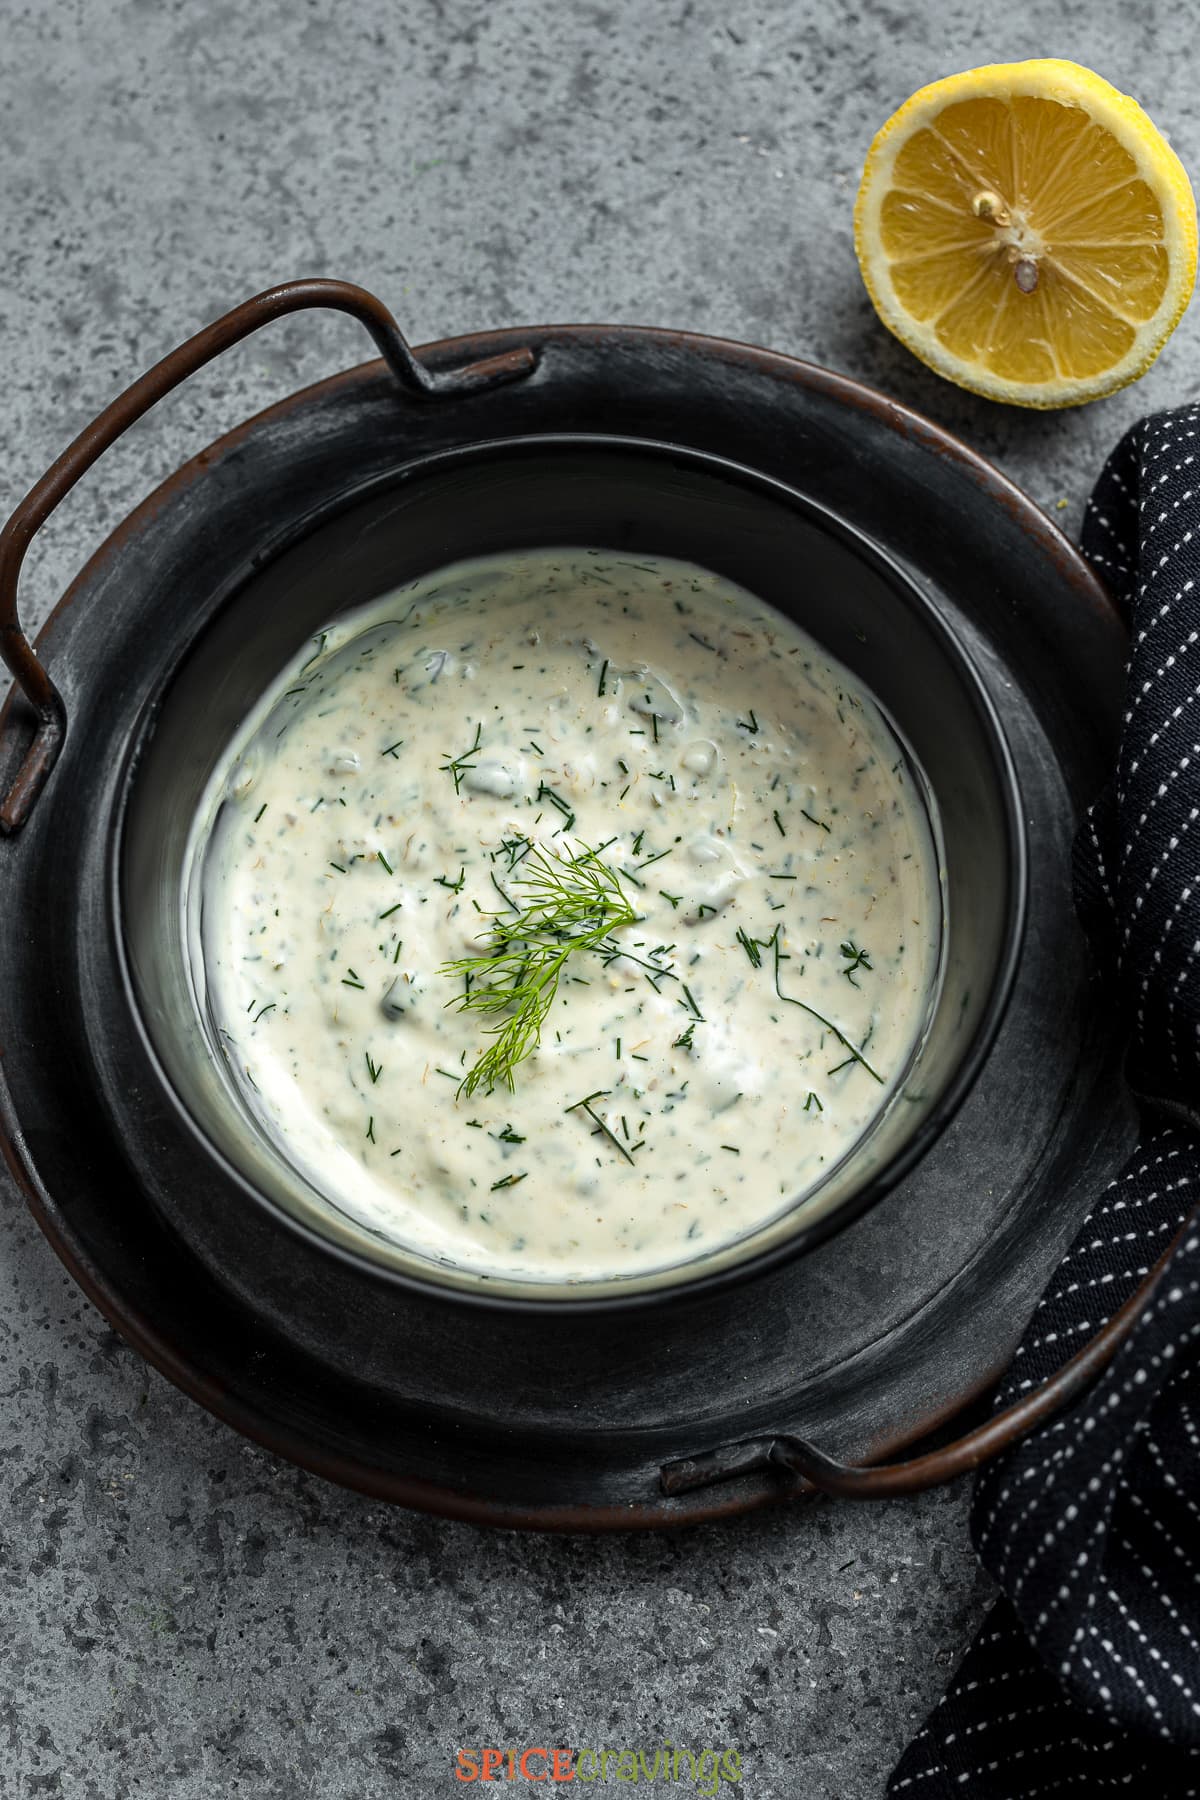 lemon caper sauce in a serving bowl garnished with fresh dill next to half a lemon